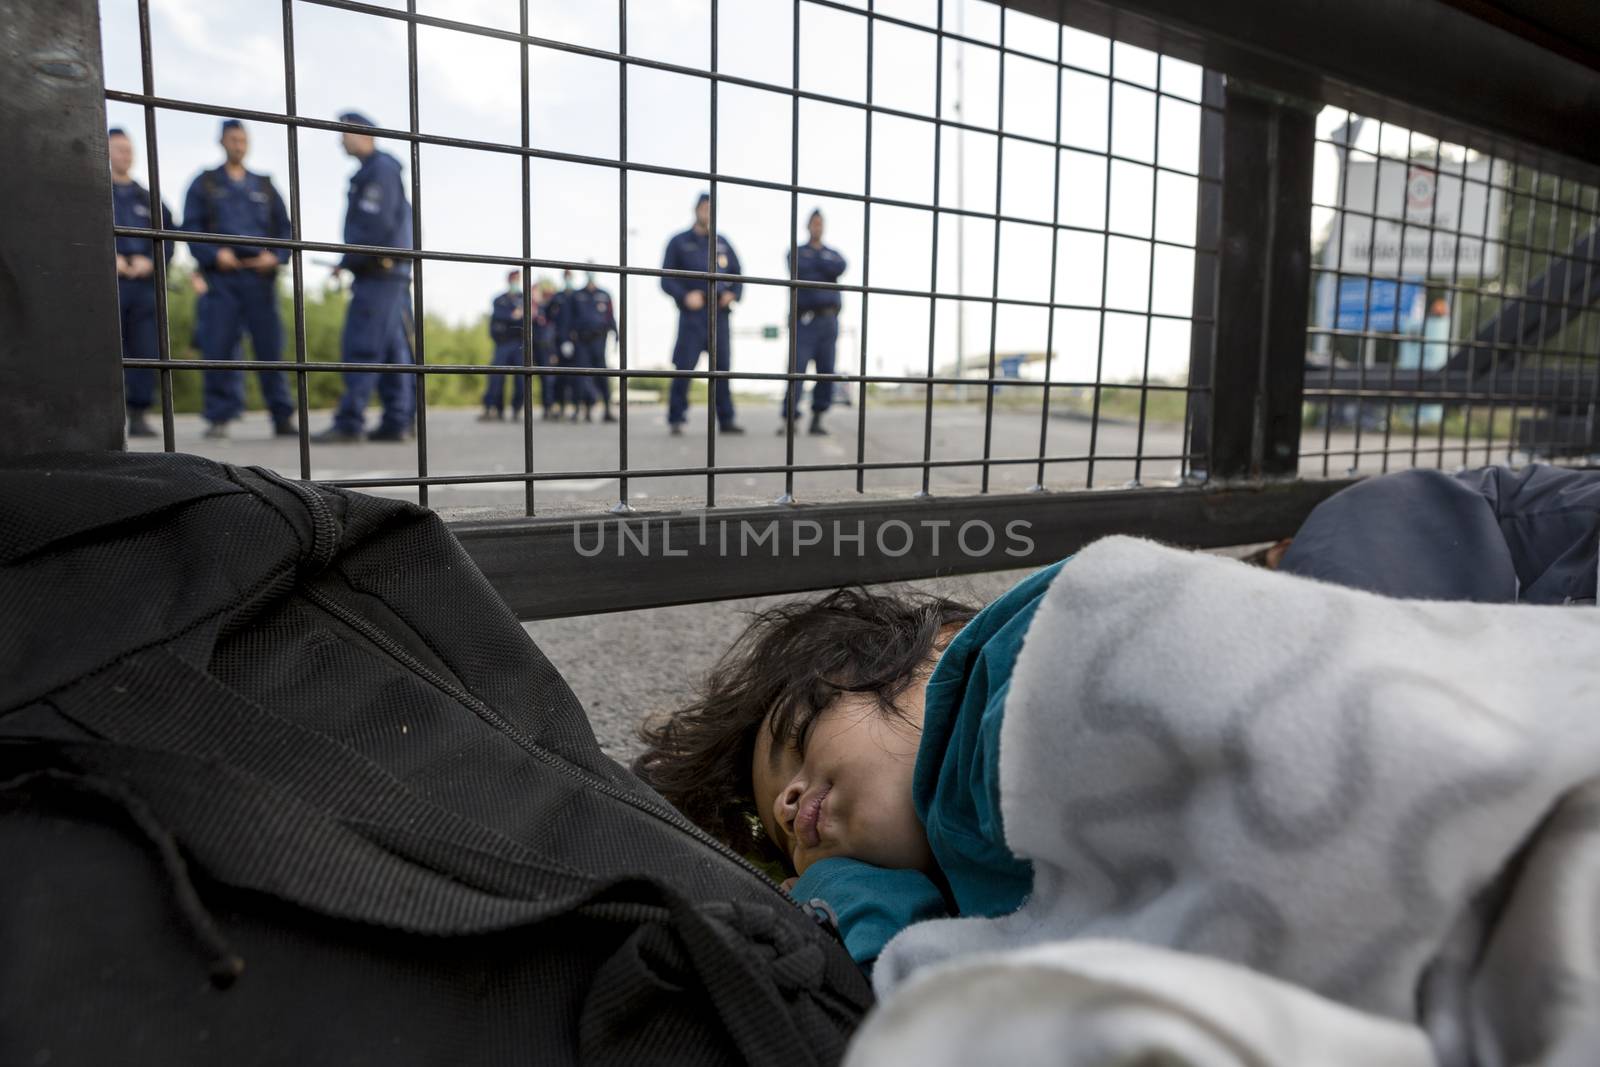 SERBIA, Horgos: A refugee child sleeps behind a border fence as Hungarian border guards appear in the background at the Serbia-Hungary border after Hungary closed the border crossing on September 16, 2015.****Restriction: Photo is not to be sold in Russia or Asia****